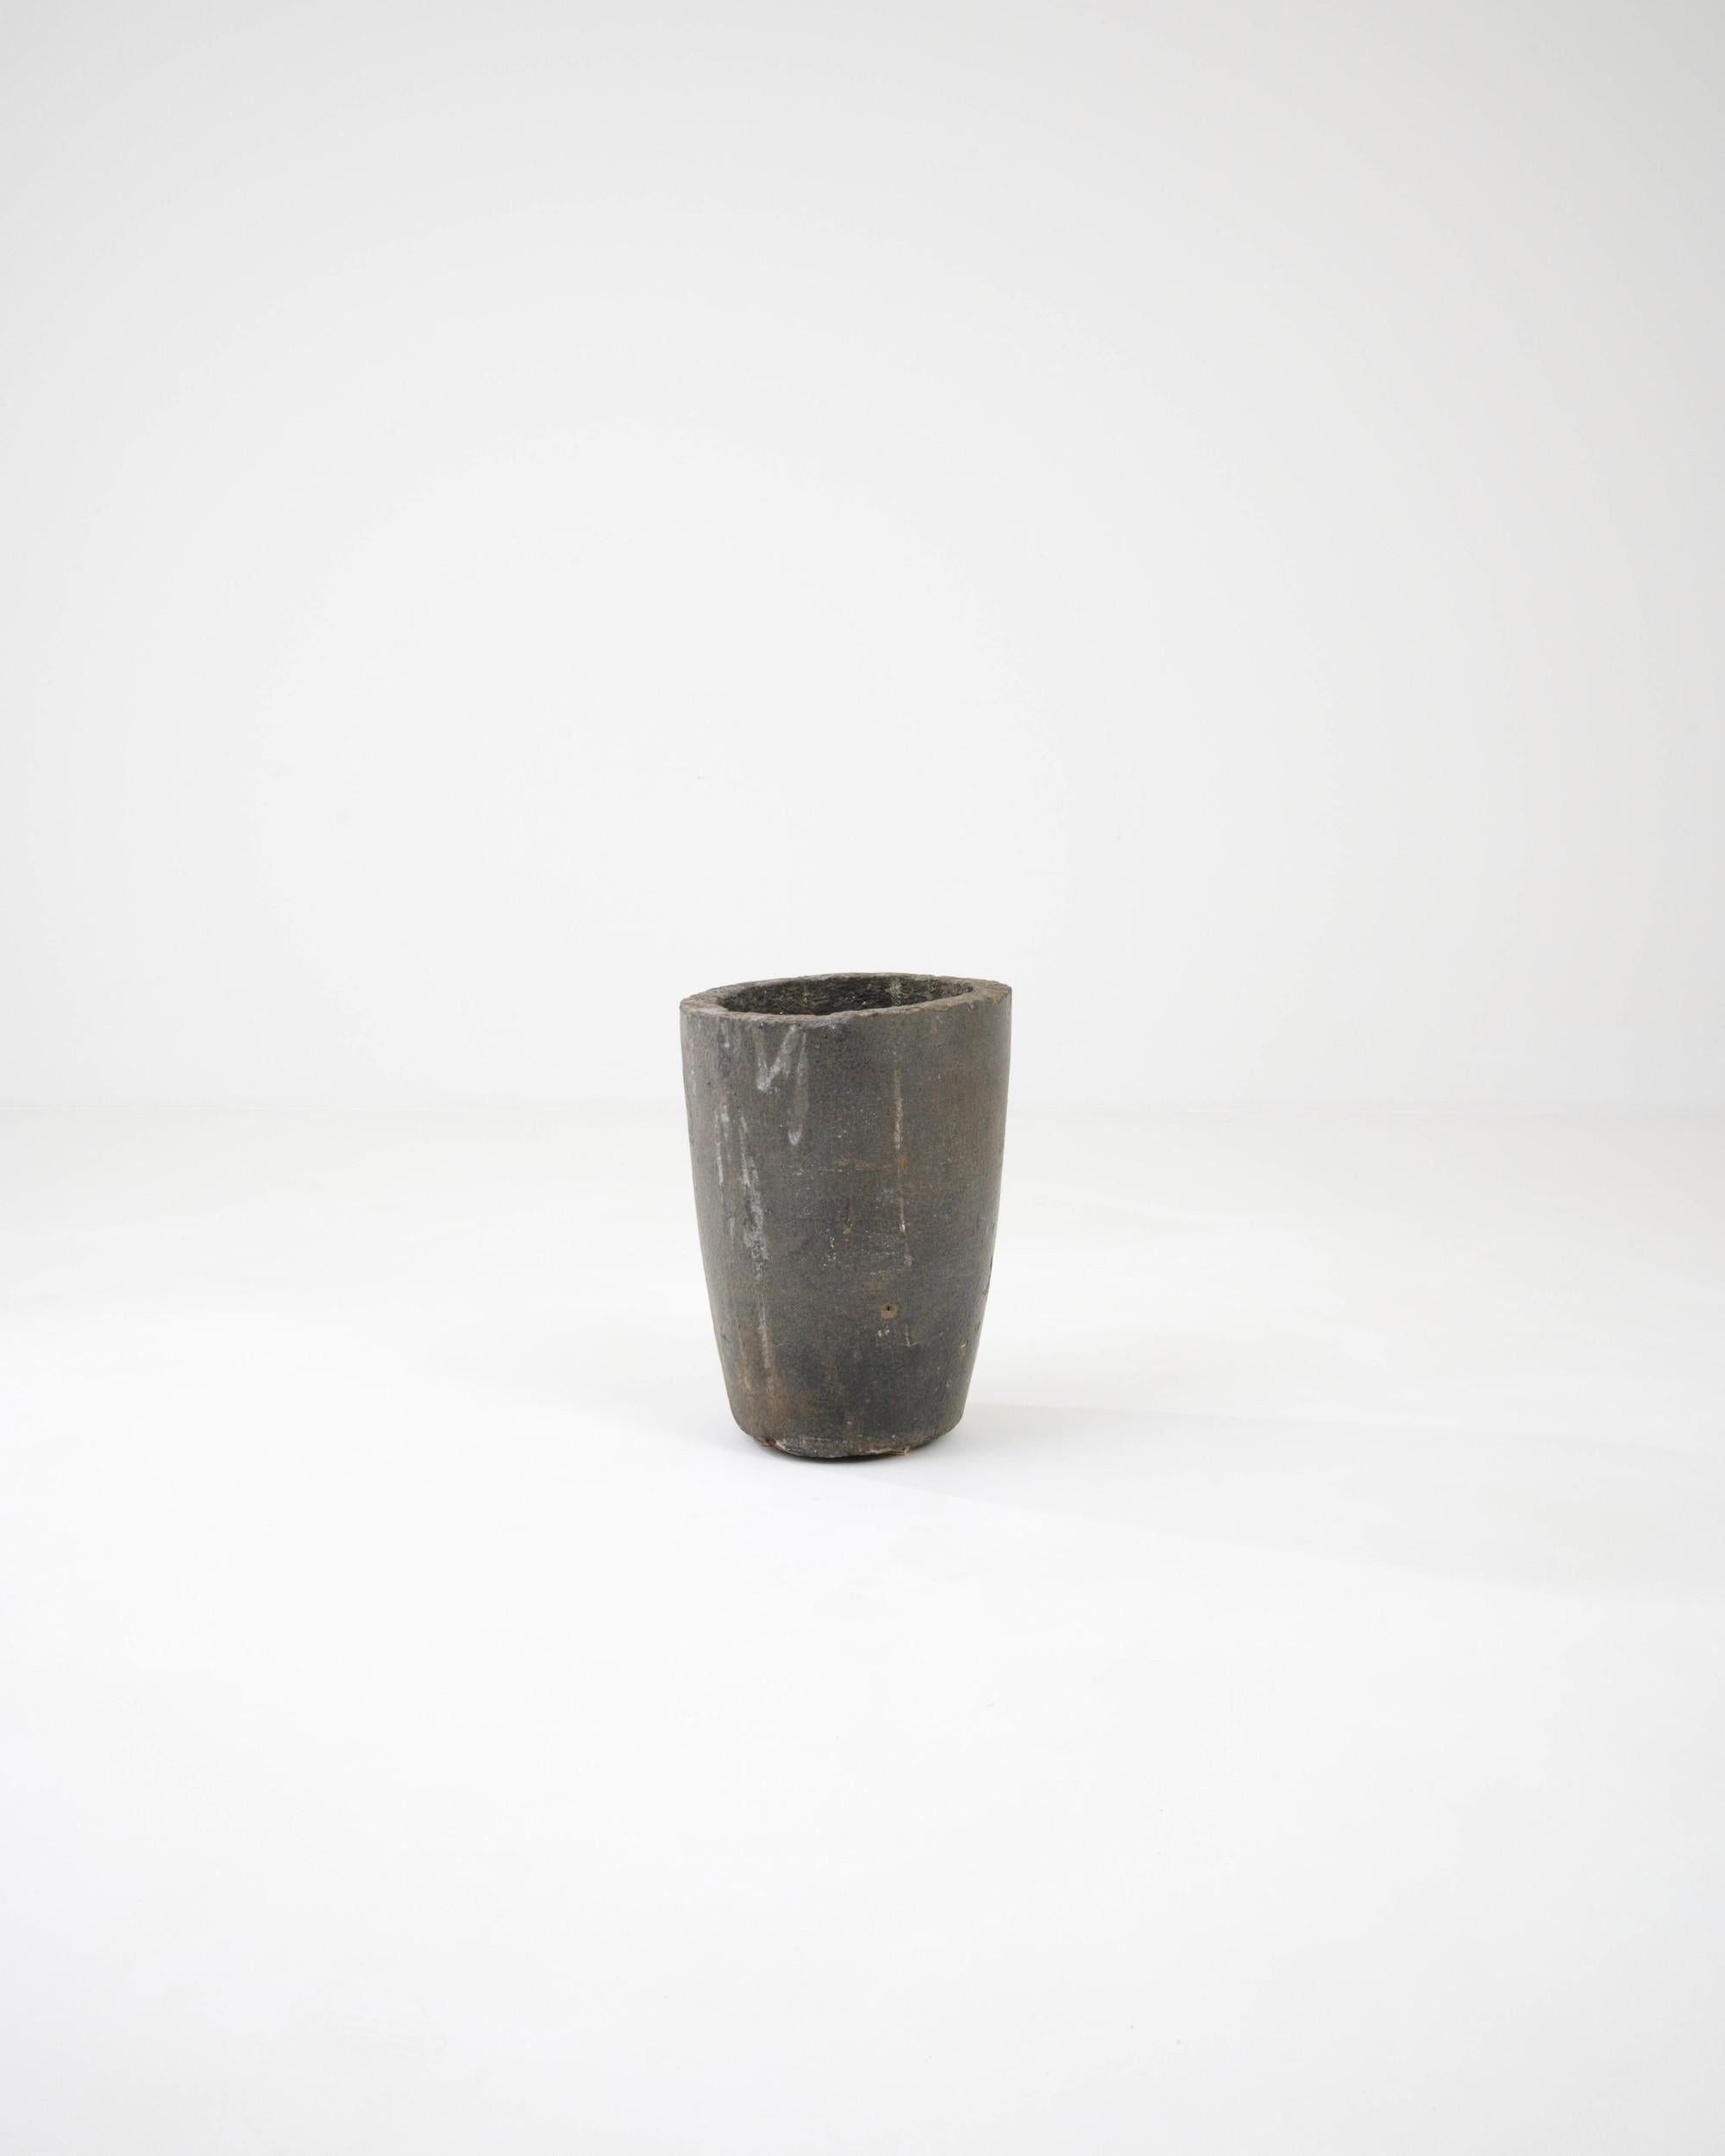 Crudely minimalist, this Czech concrete planter epitomizes solid brutalist aesthetics. Its uneven edges accentuate the rawness of the naked gray concrete that will imbue your space with a stylish industrial touch.